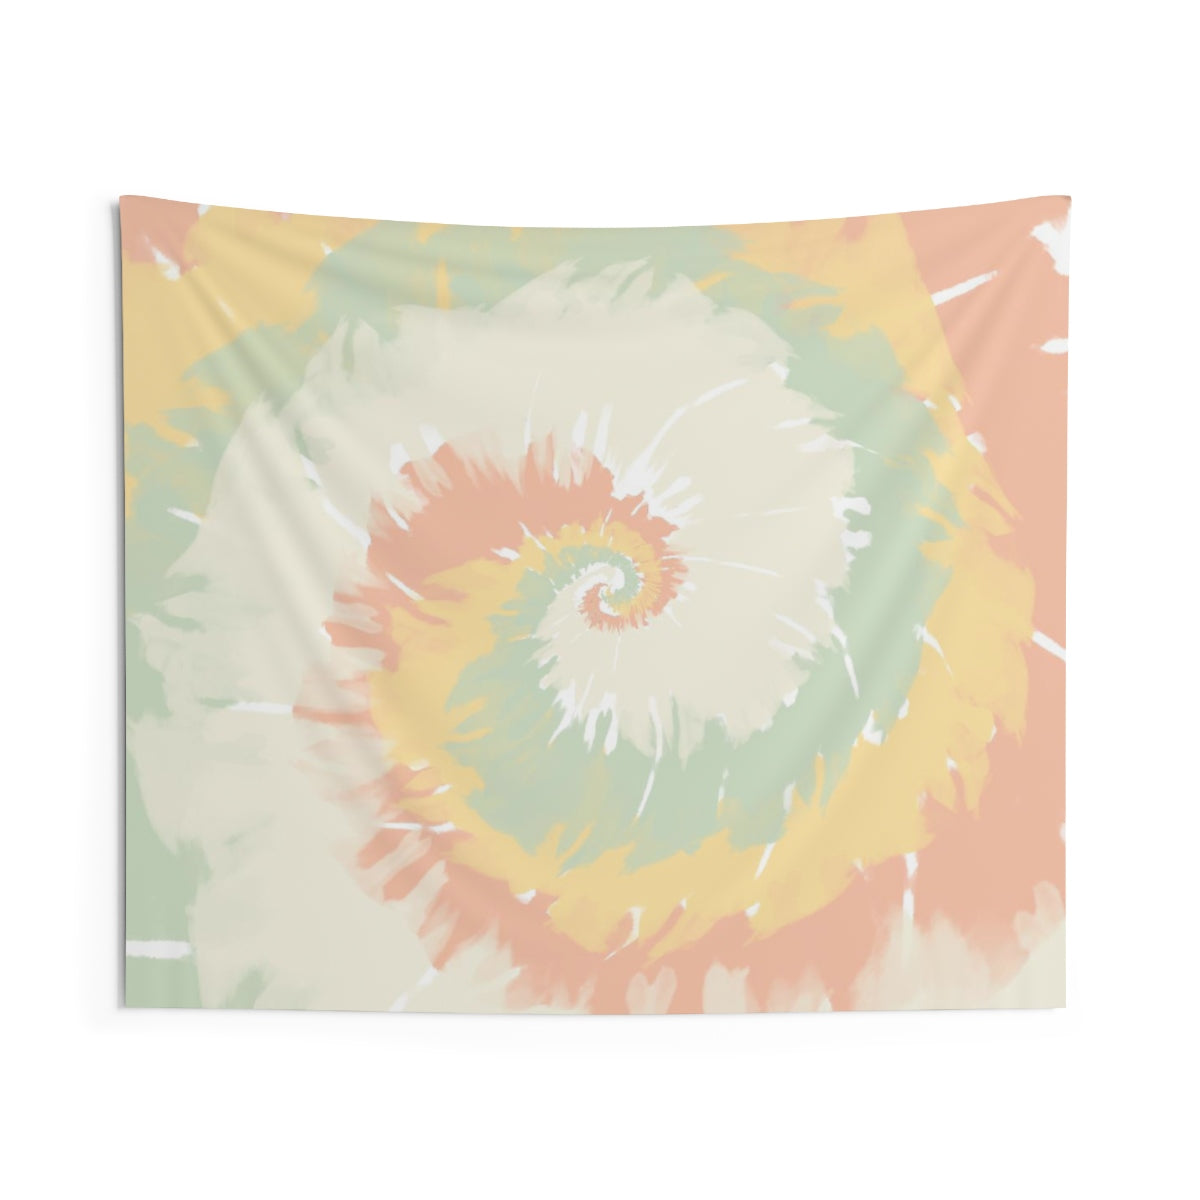 Tie Dye Tapestry Wall Hanging, Pastel Swirl Art Landscape Indoor Wall Tapestries Large Small Decor Home Dorm Room Gift Starcove Fashion